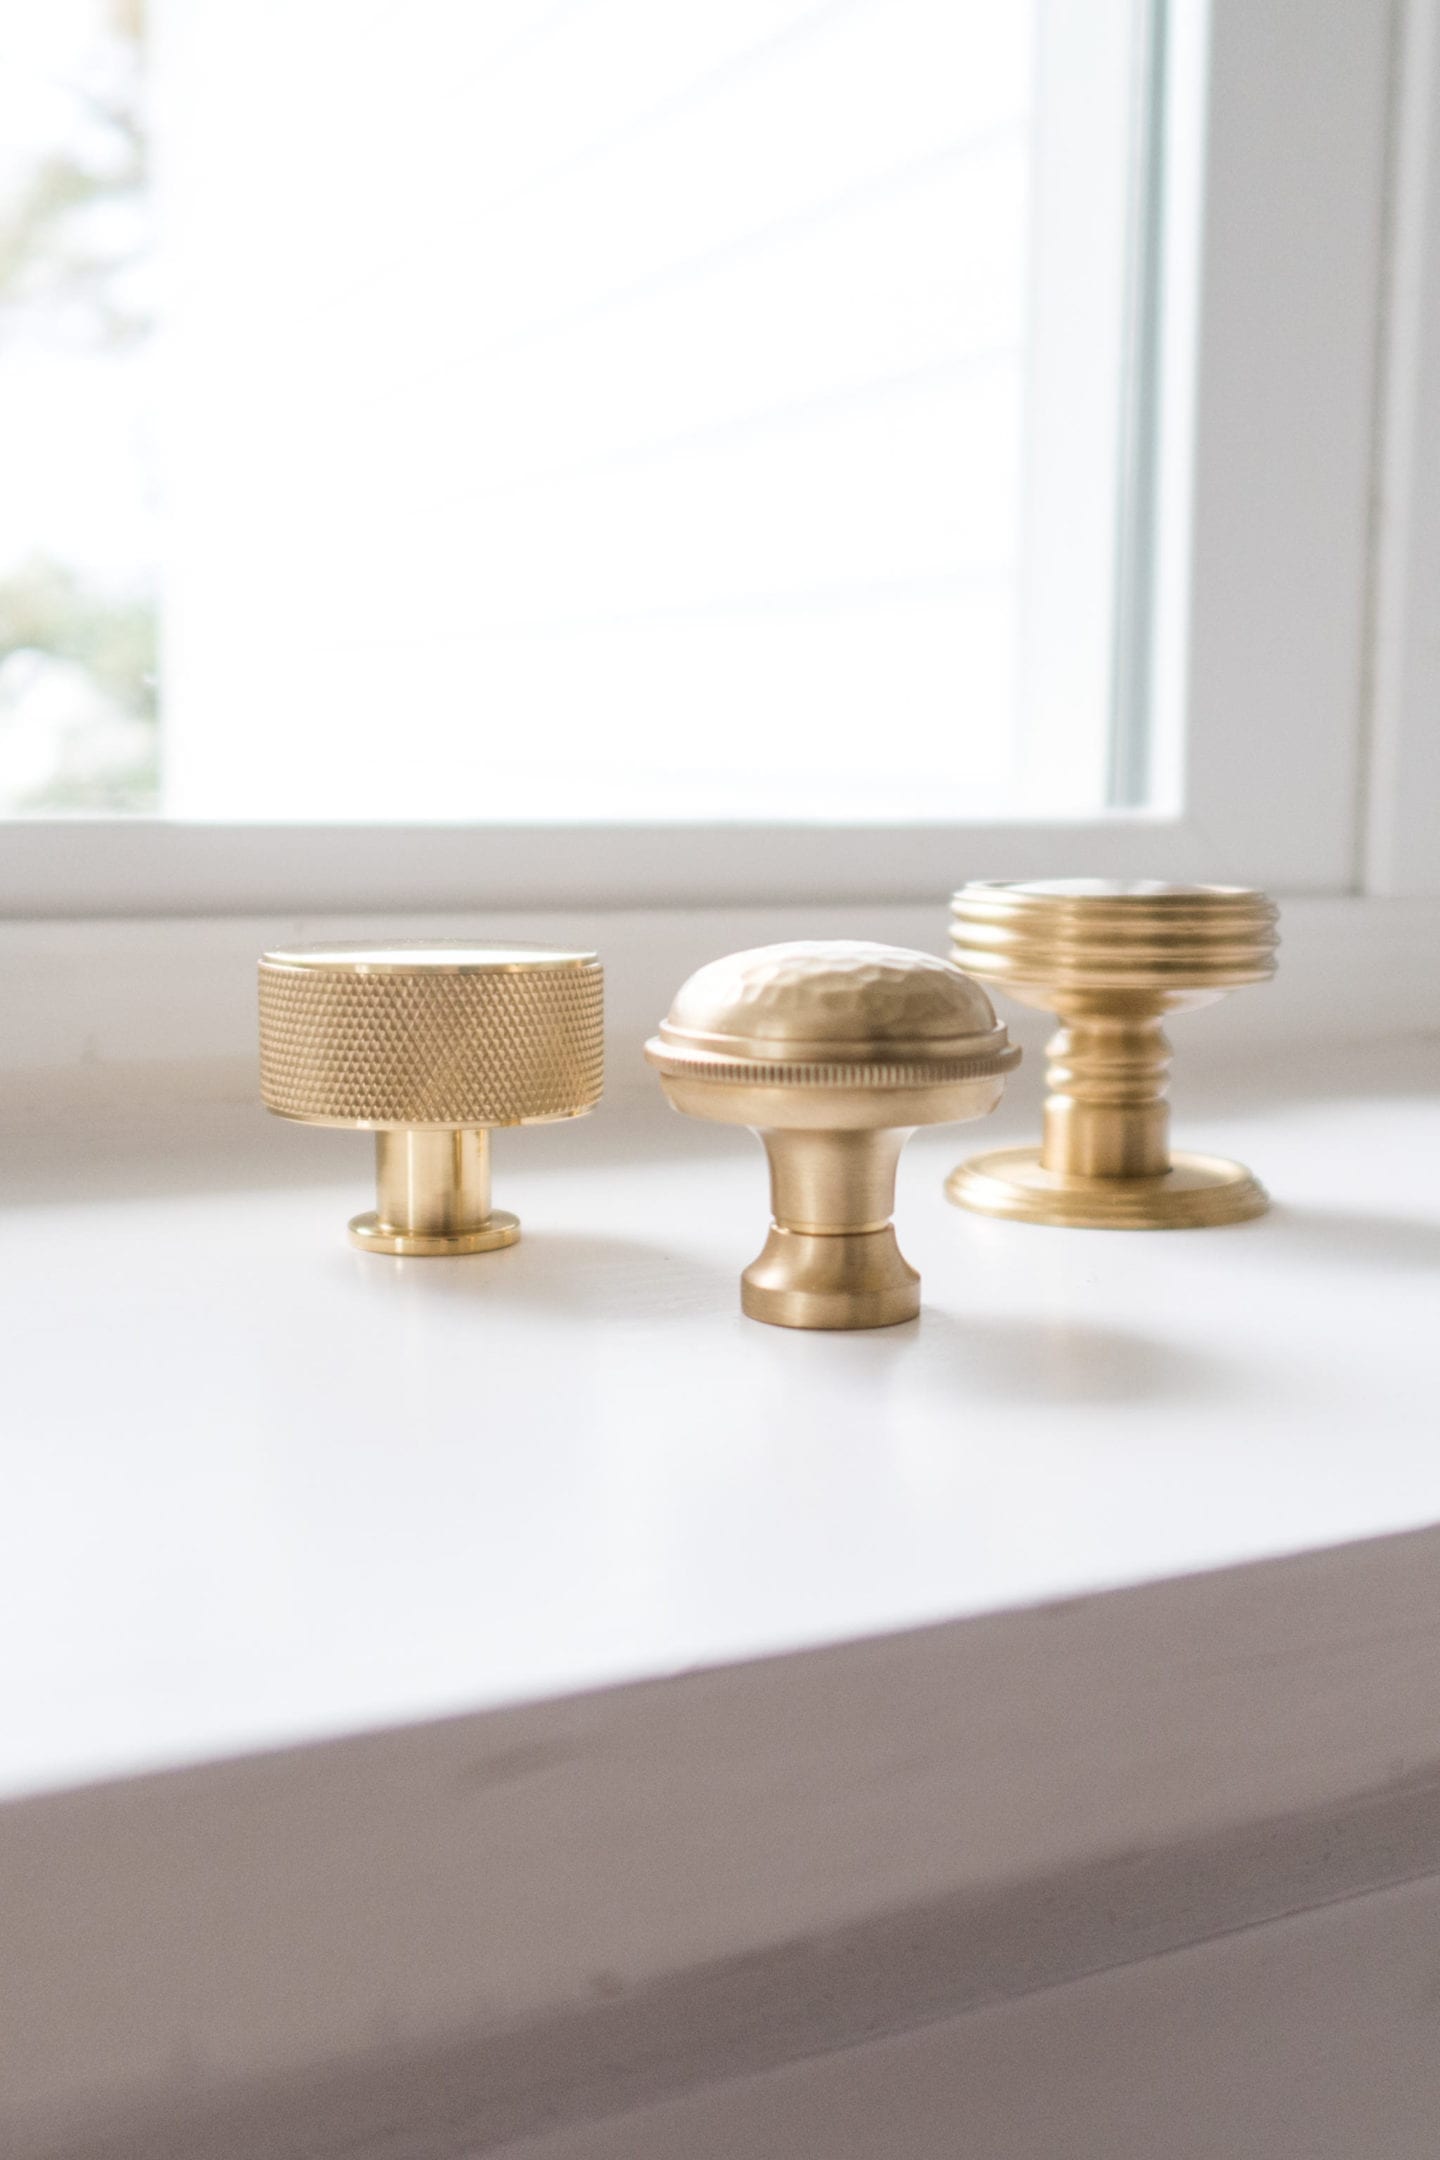 VESTA knobs. How to pick hardware for your kitchen makeover.